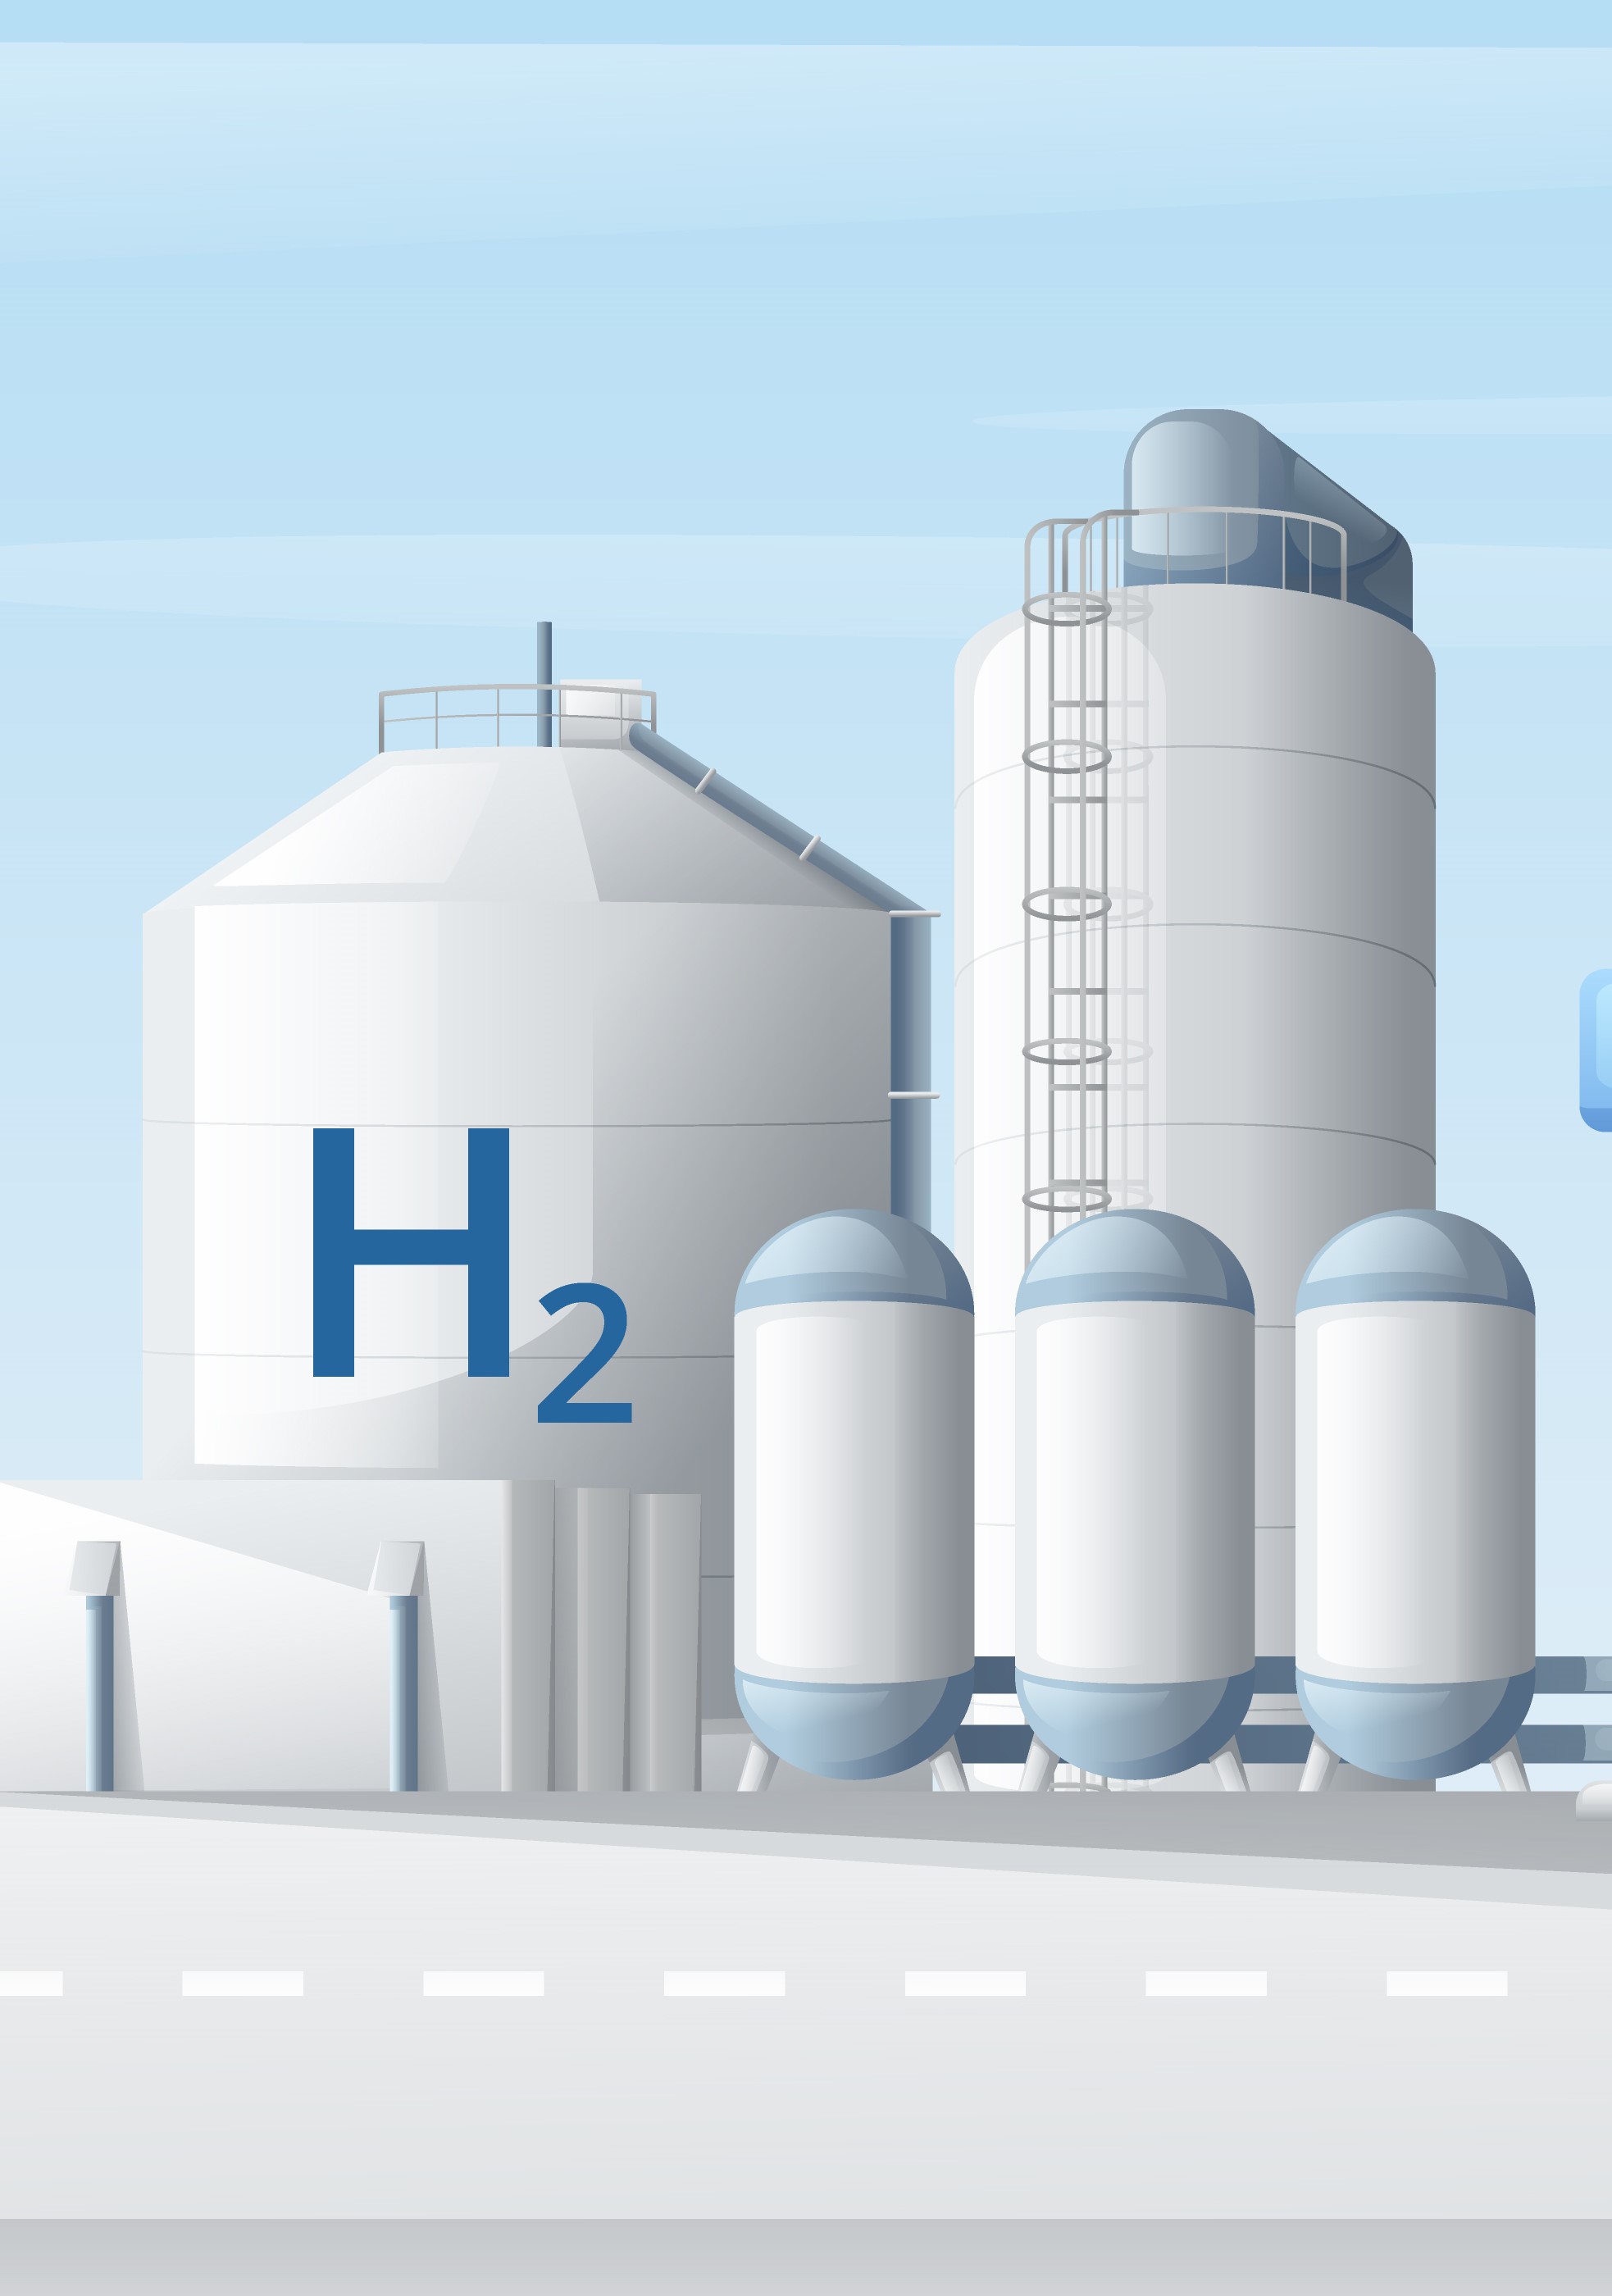 What India can do to site green hydrogen production plants effectively